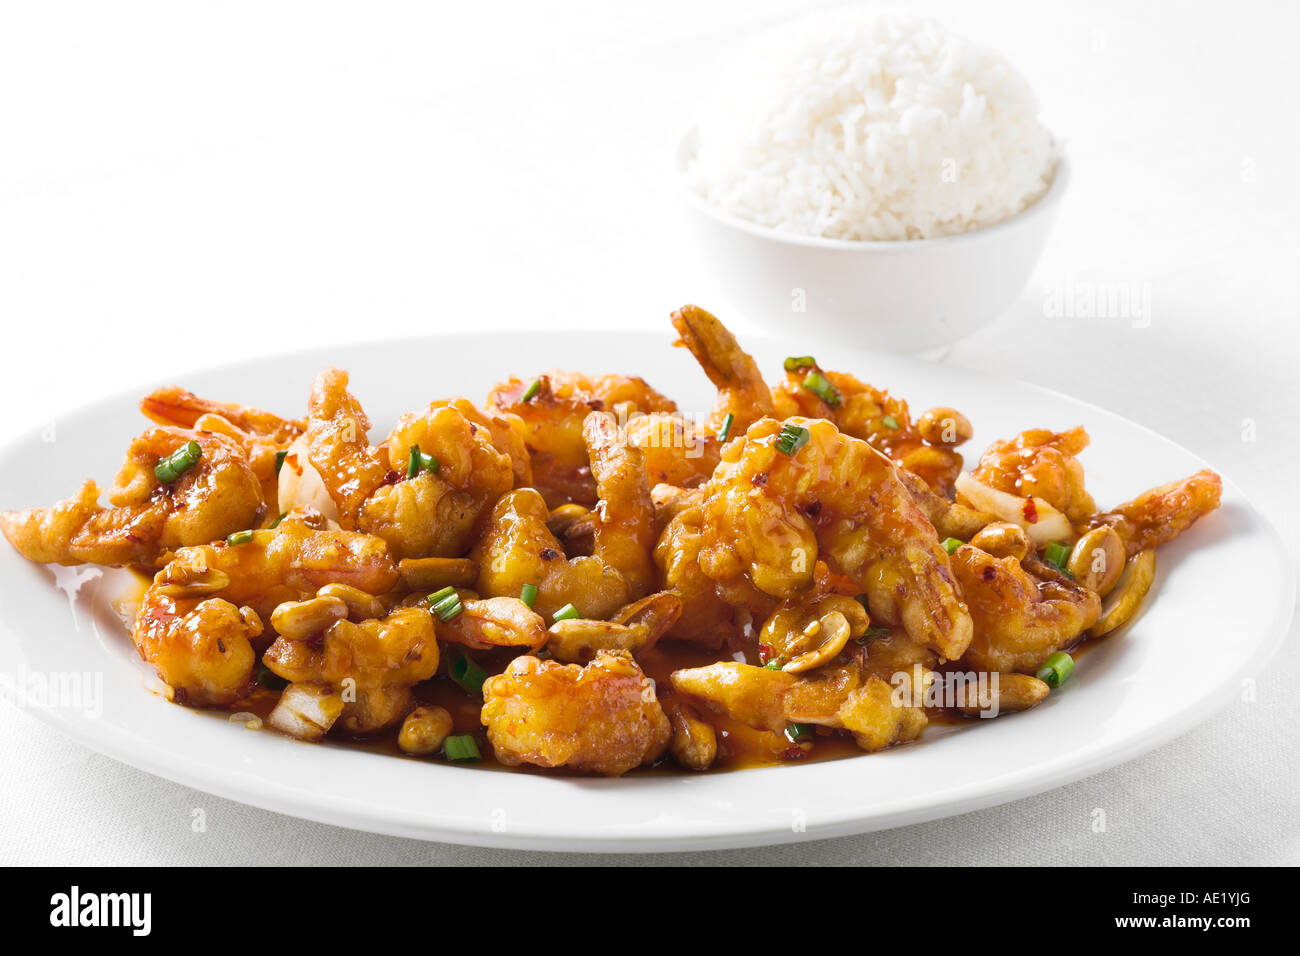 Kung Pao pau shrimp prawn spicy oyster sauce chinese food with green onion dish white plate delicious mouth watering savory Stock Photo